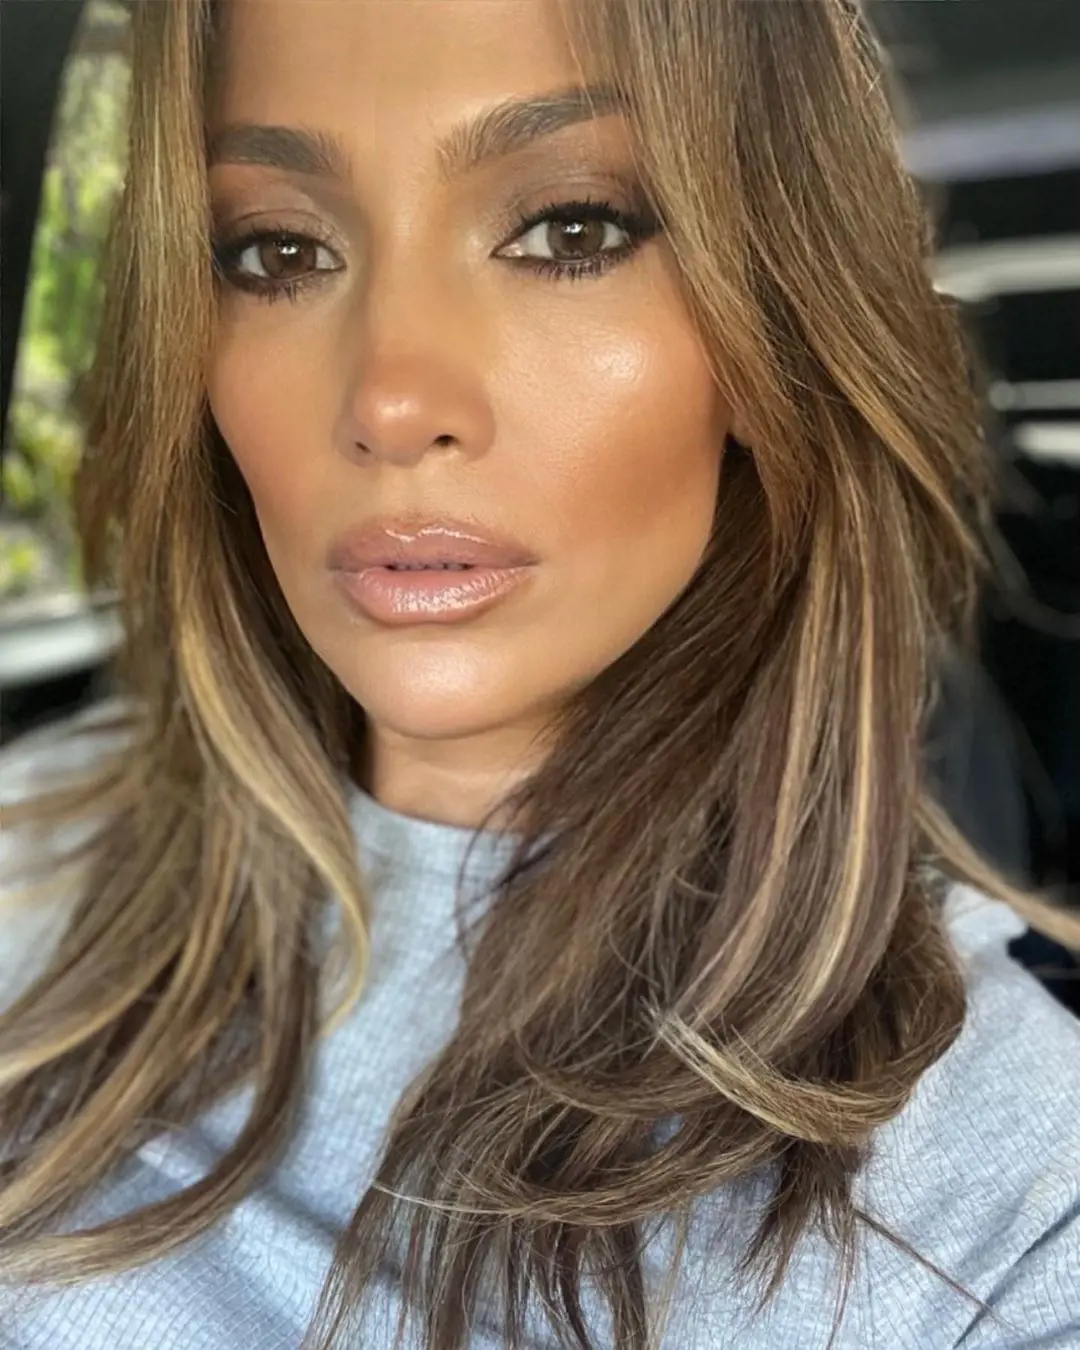 Jennifer Lopez debuted in the music industry in 1999 and given numerous hits.